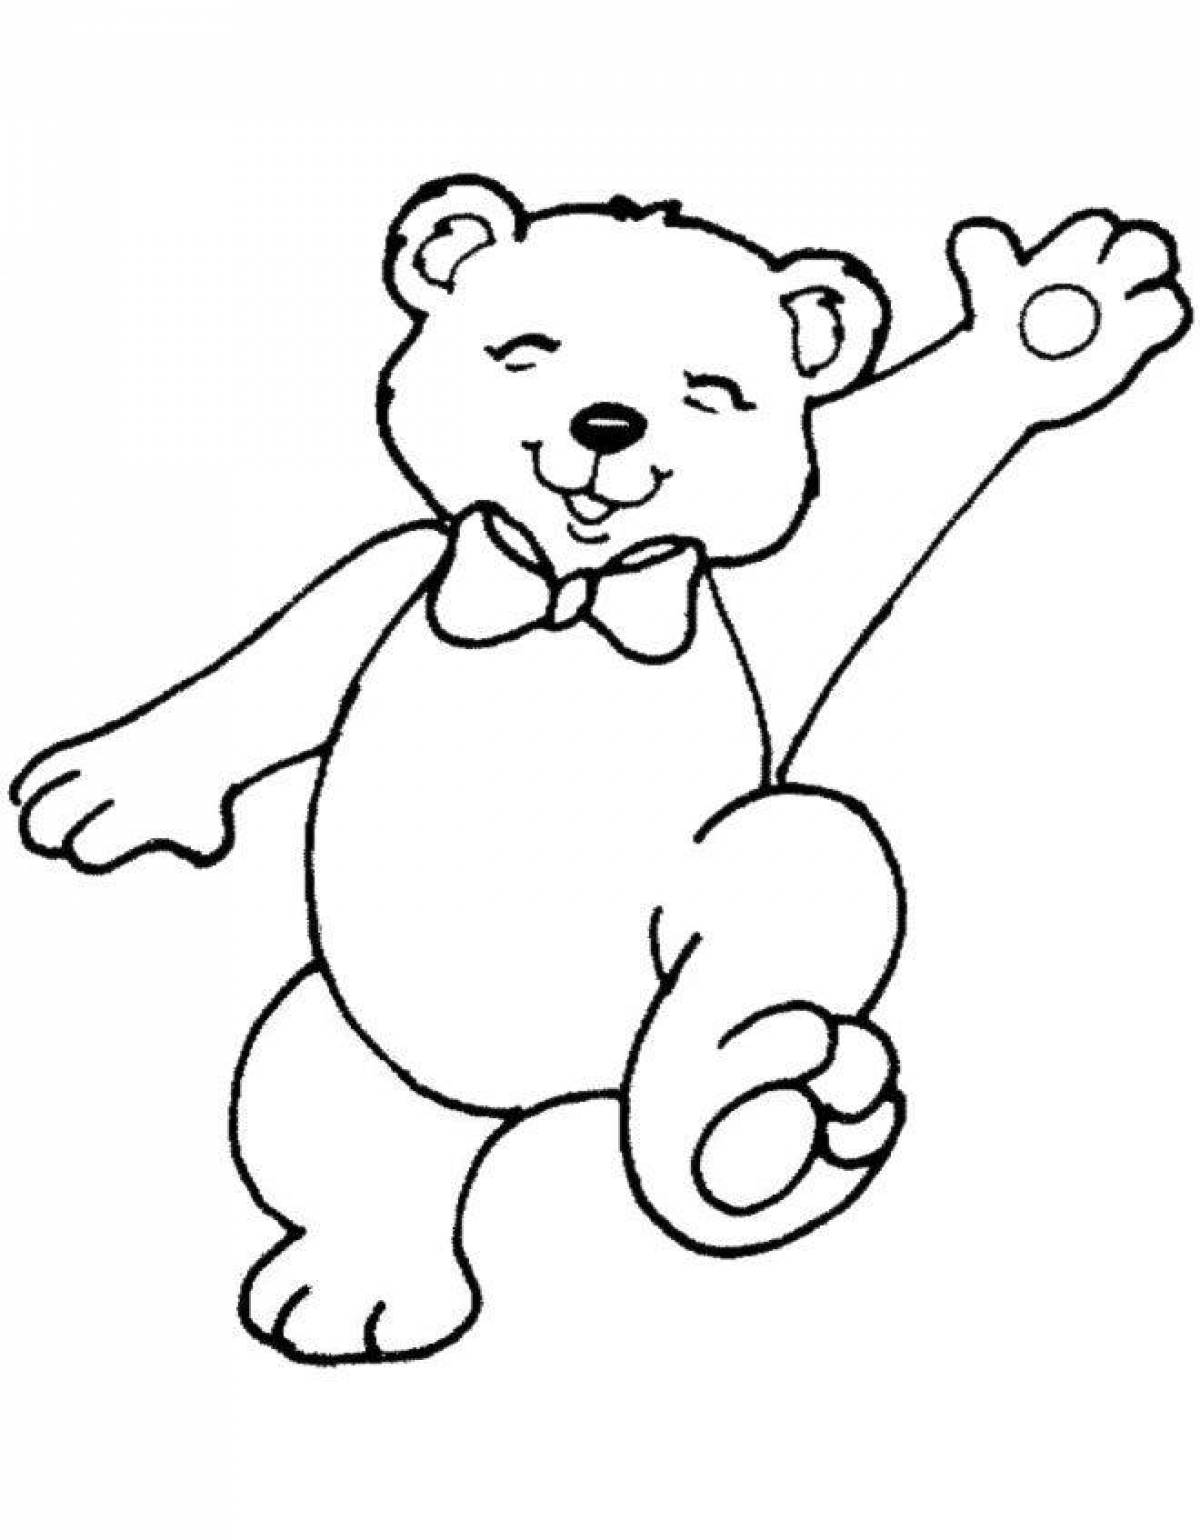 Animated bear coloring page for kids